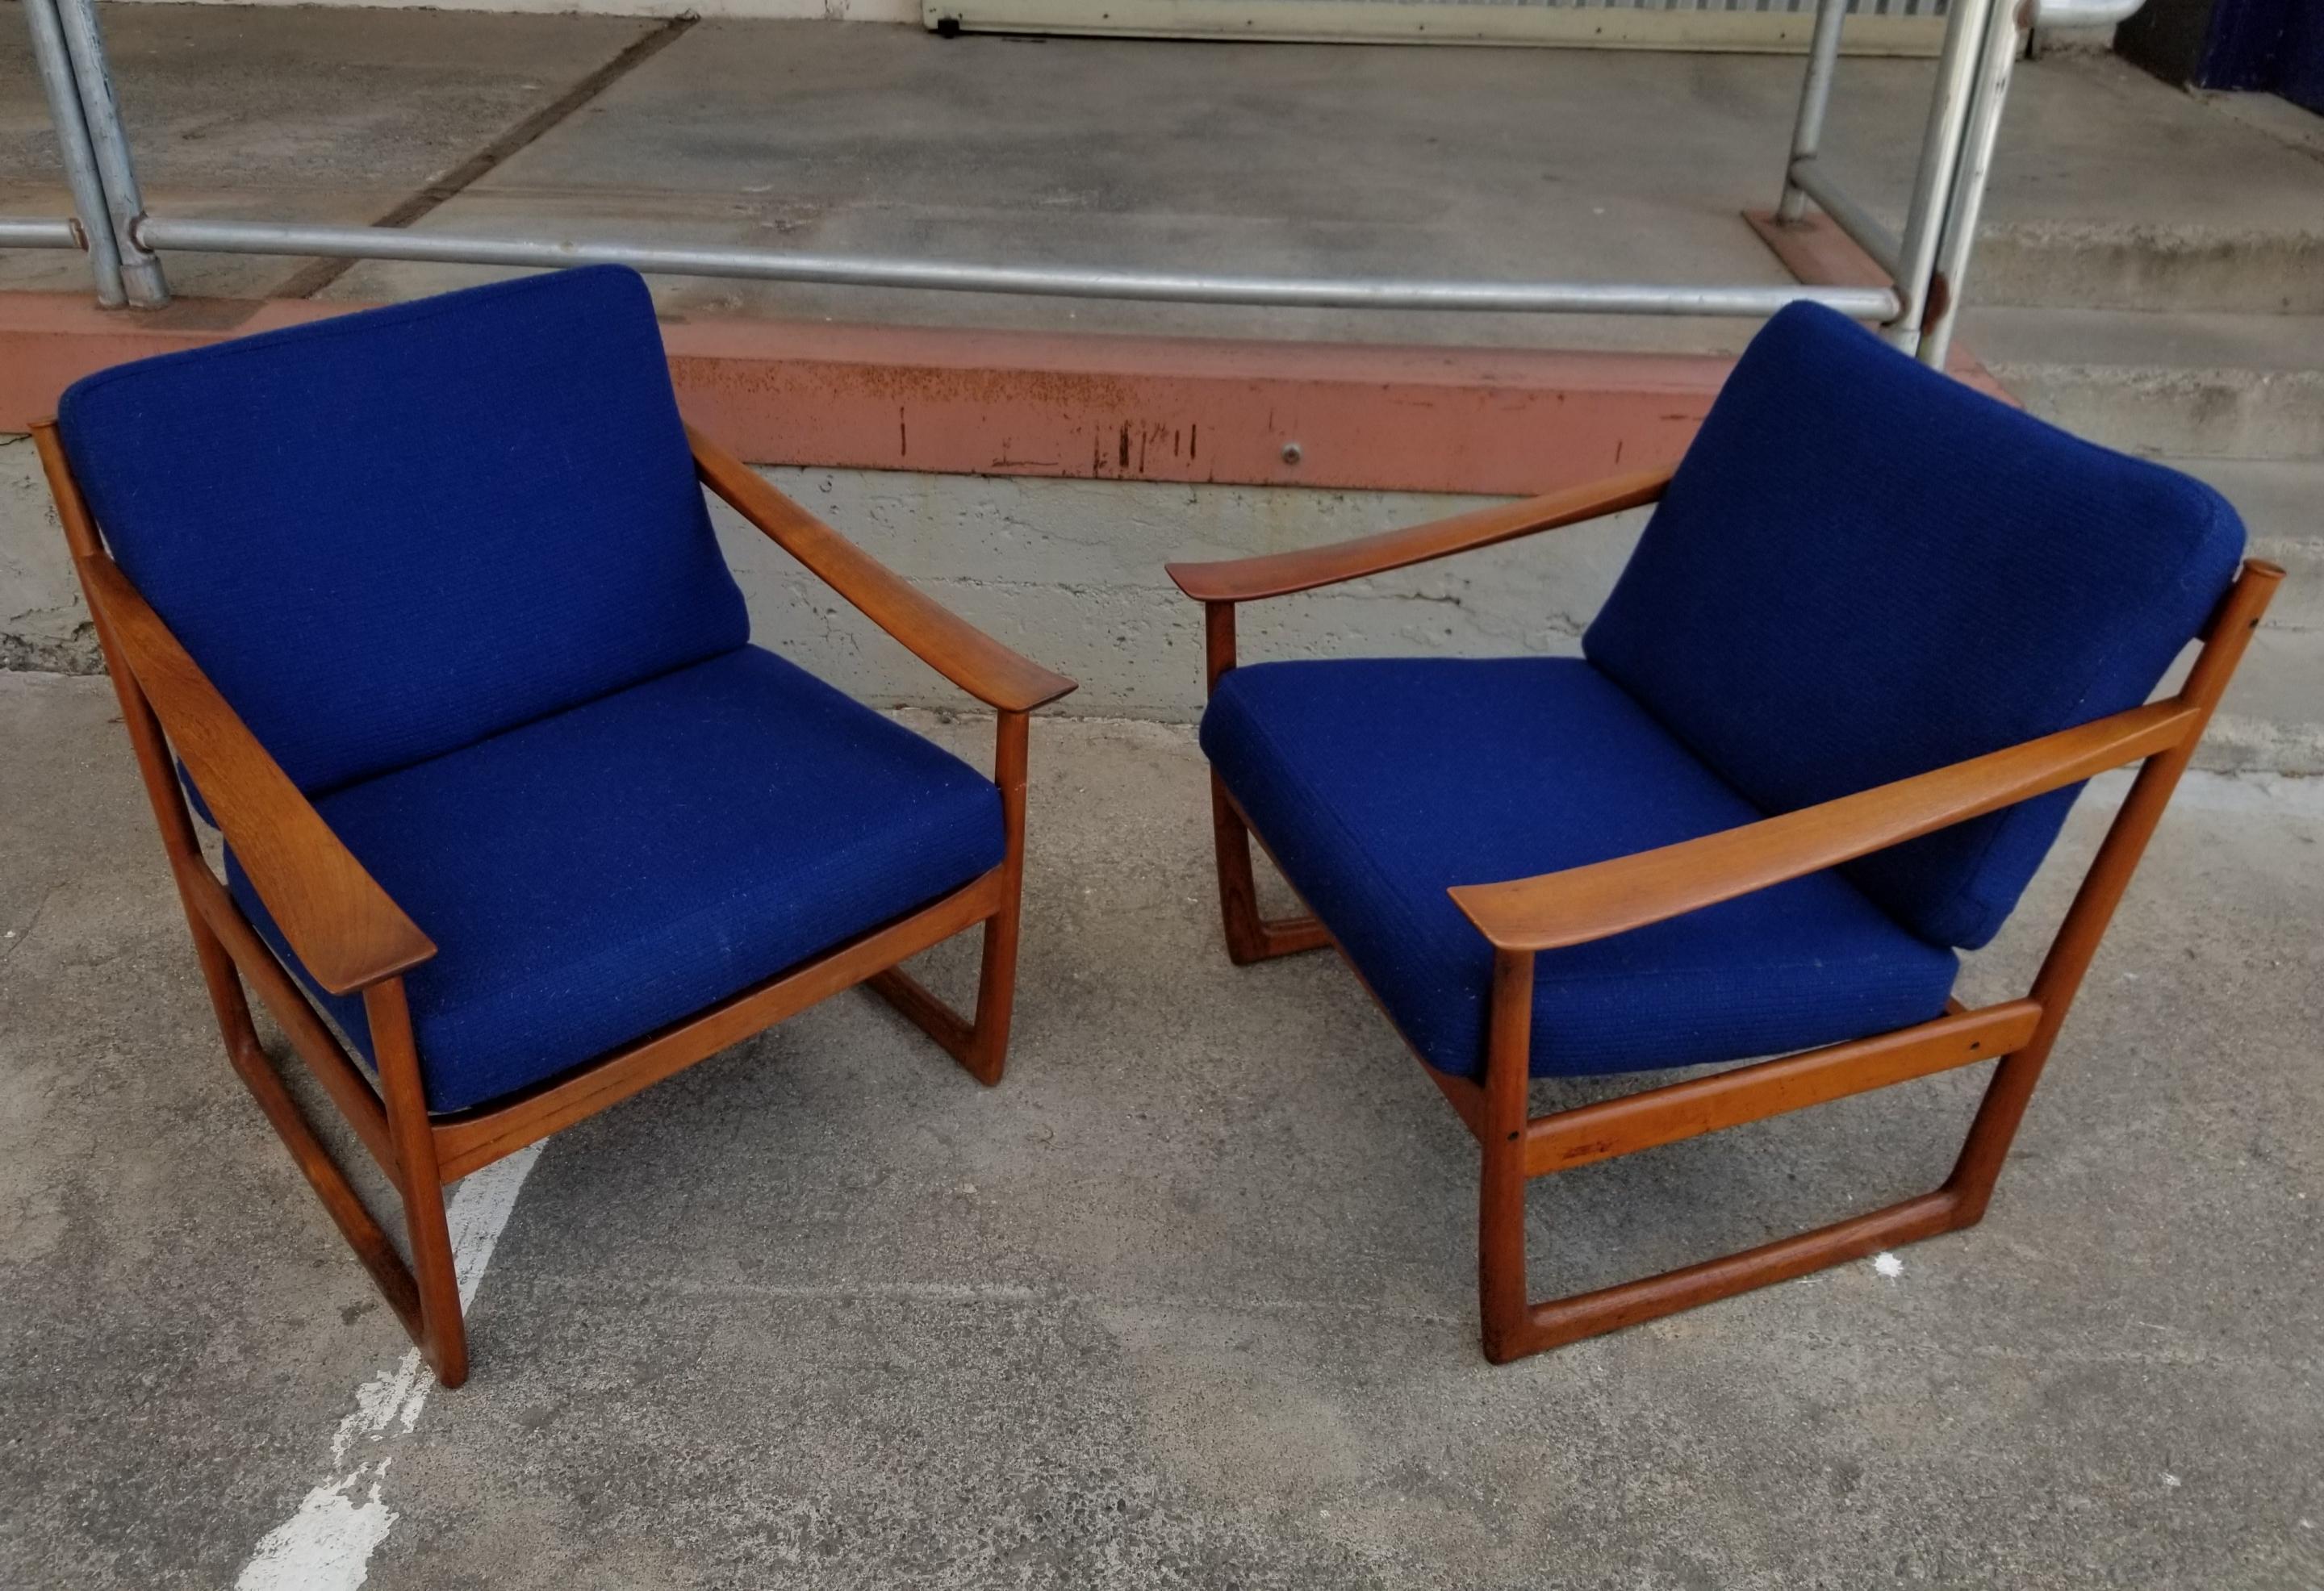 Beautiful pair of Danish modern teak lounge chairs designed by Peter Hvidt & Orla Mølgaard-Nielsen for France & Søn. Denmark, circa 1960. Very good vintage condition with. Warm glow to original finish. Each chair retains France & Søn label.